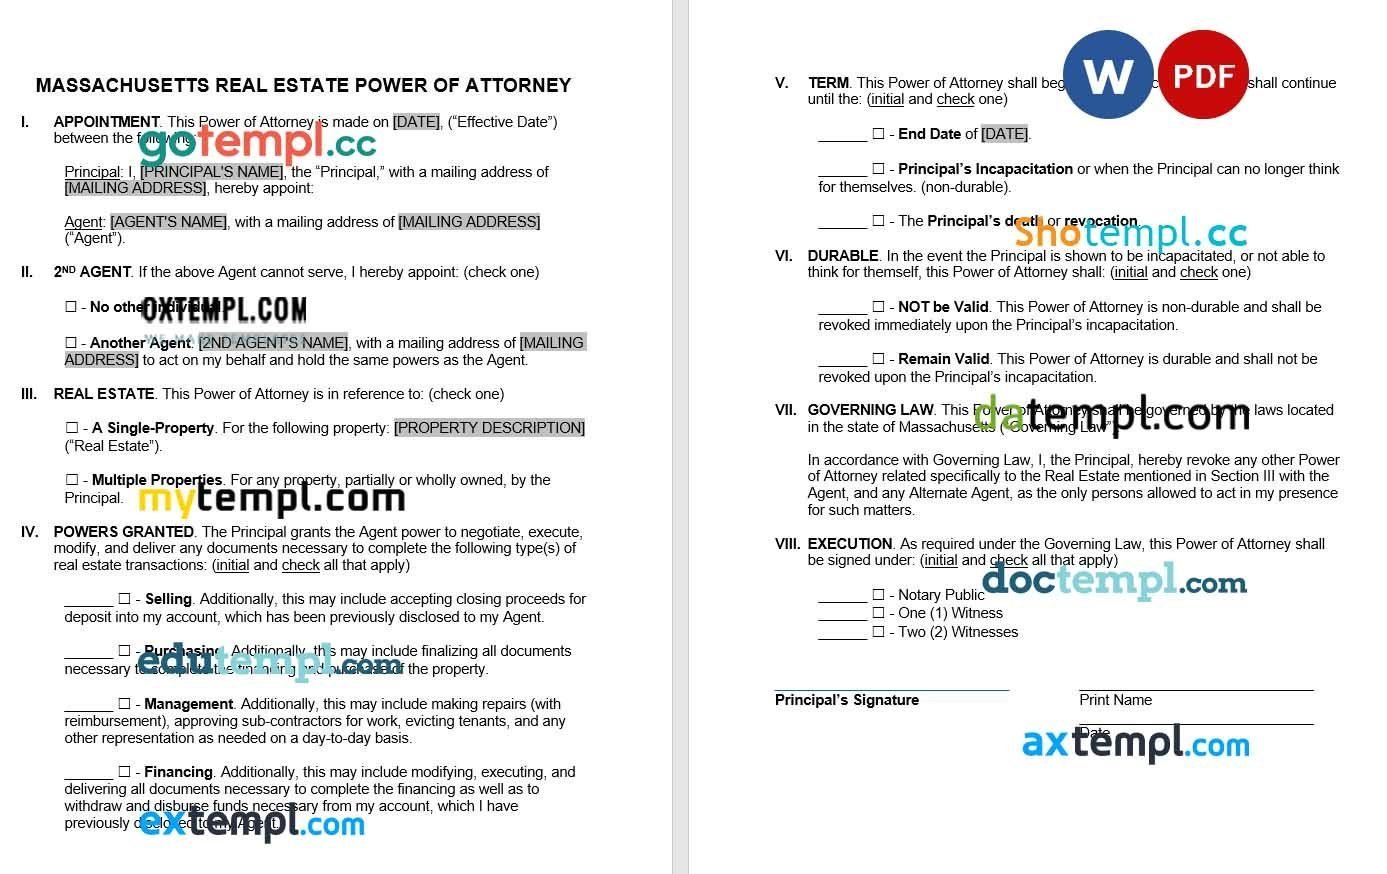 Massachusetts Real Estate Power of Attorney Form example, fully editable